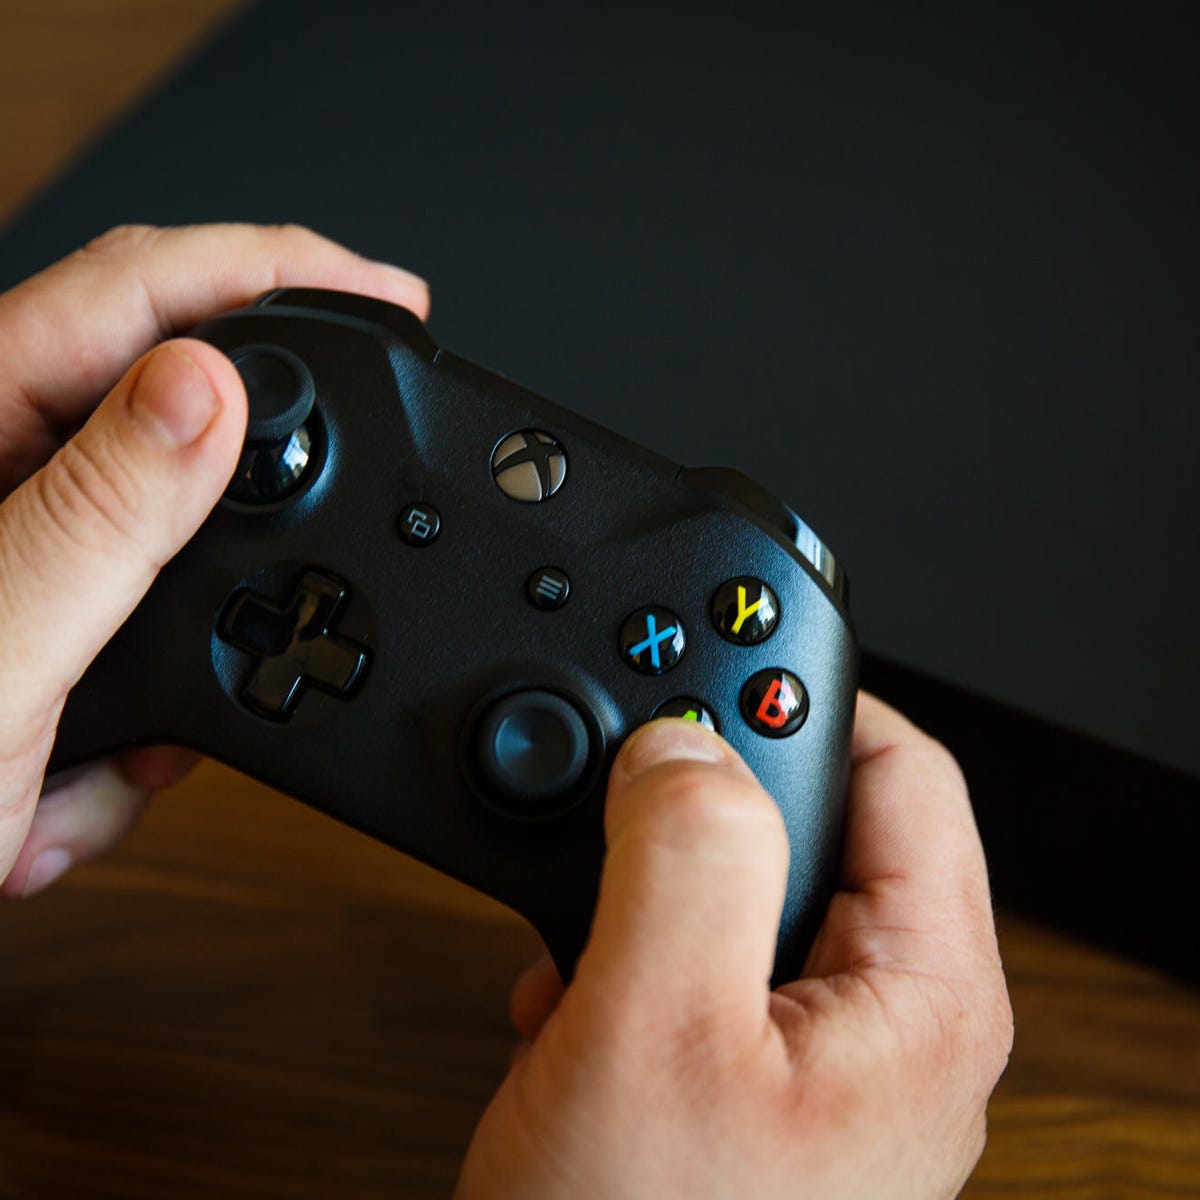 Microsoft Xbox One review: It's the powerful console you can buy. But is enough? - CNET